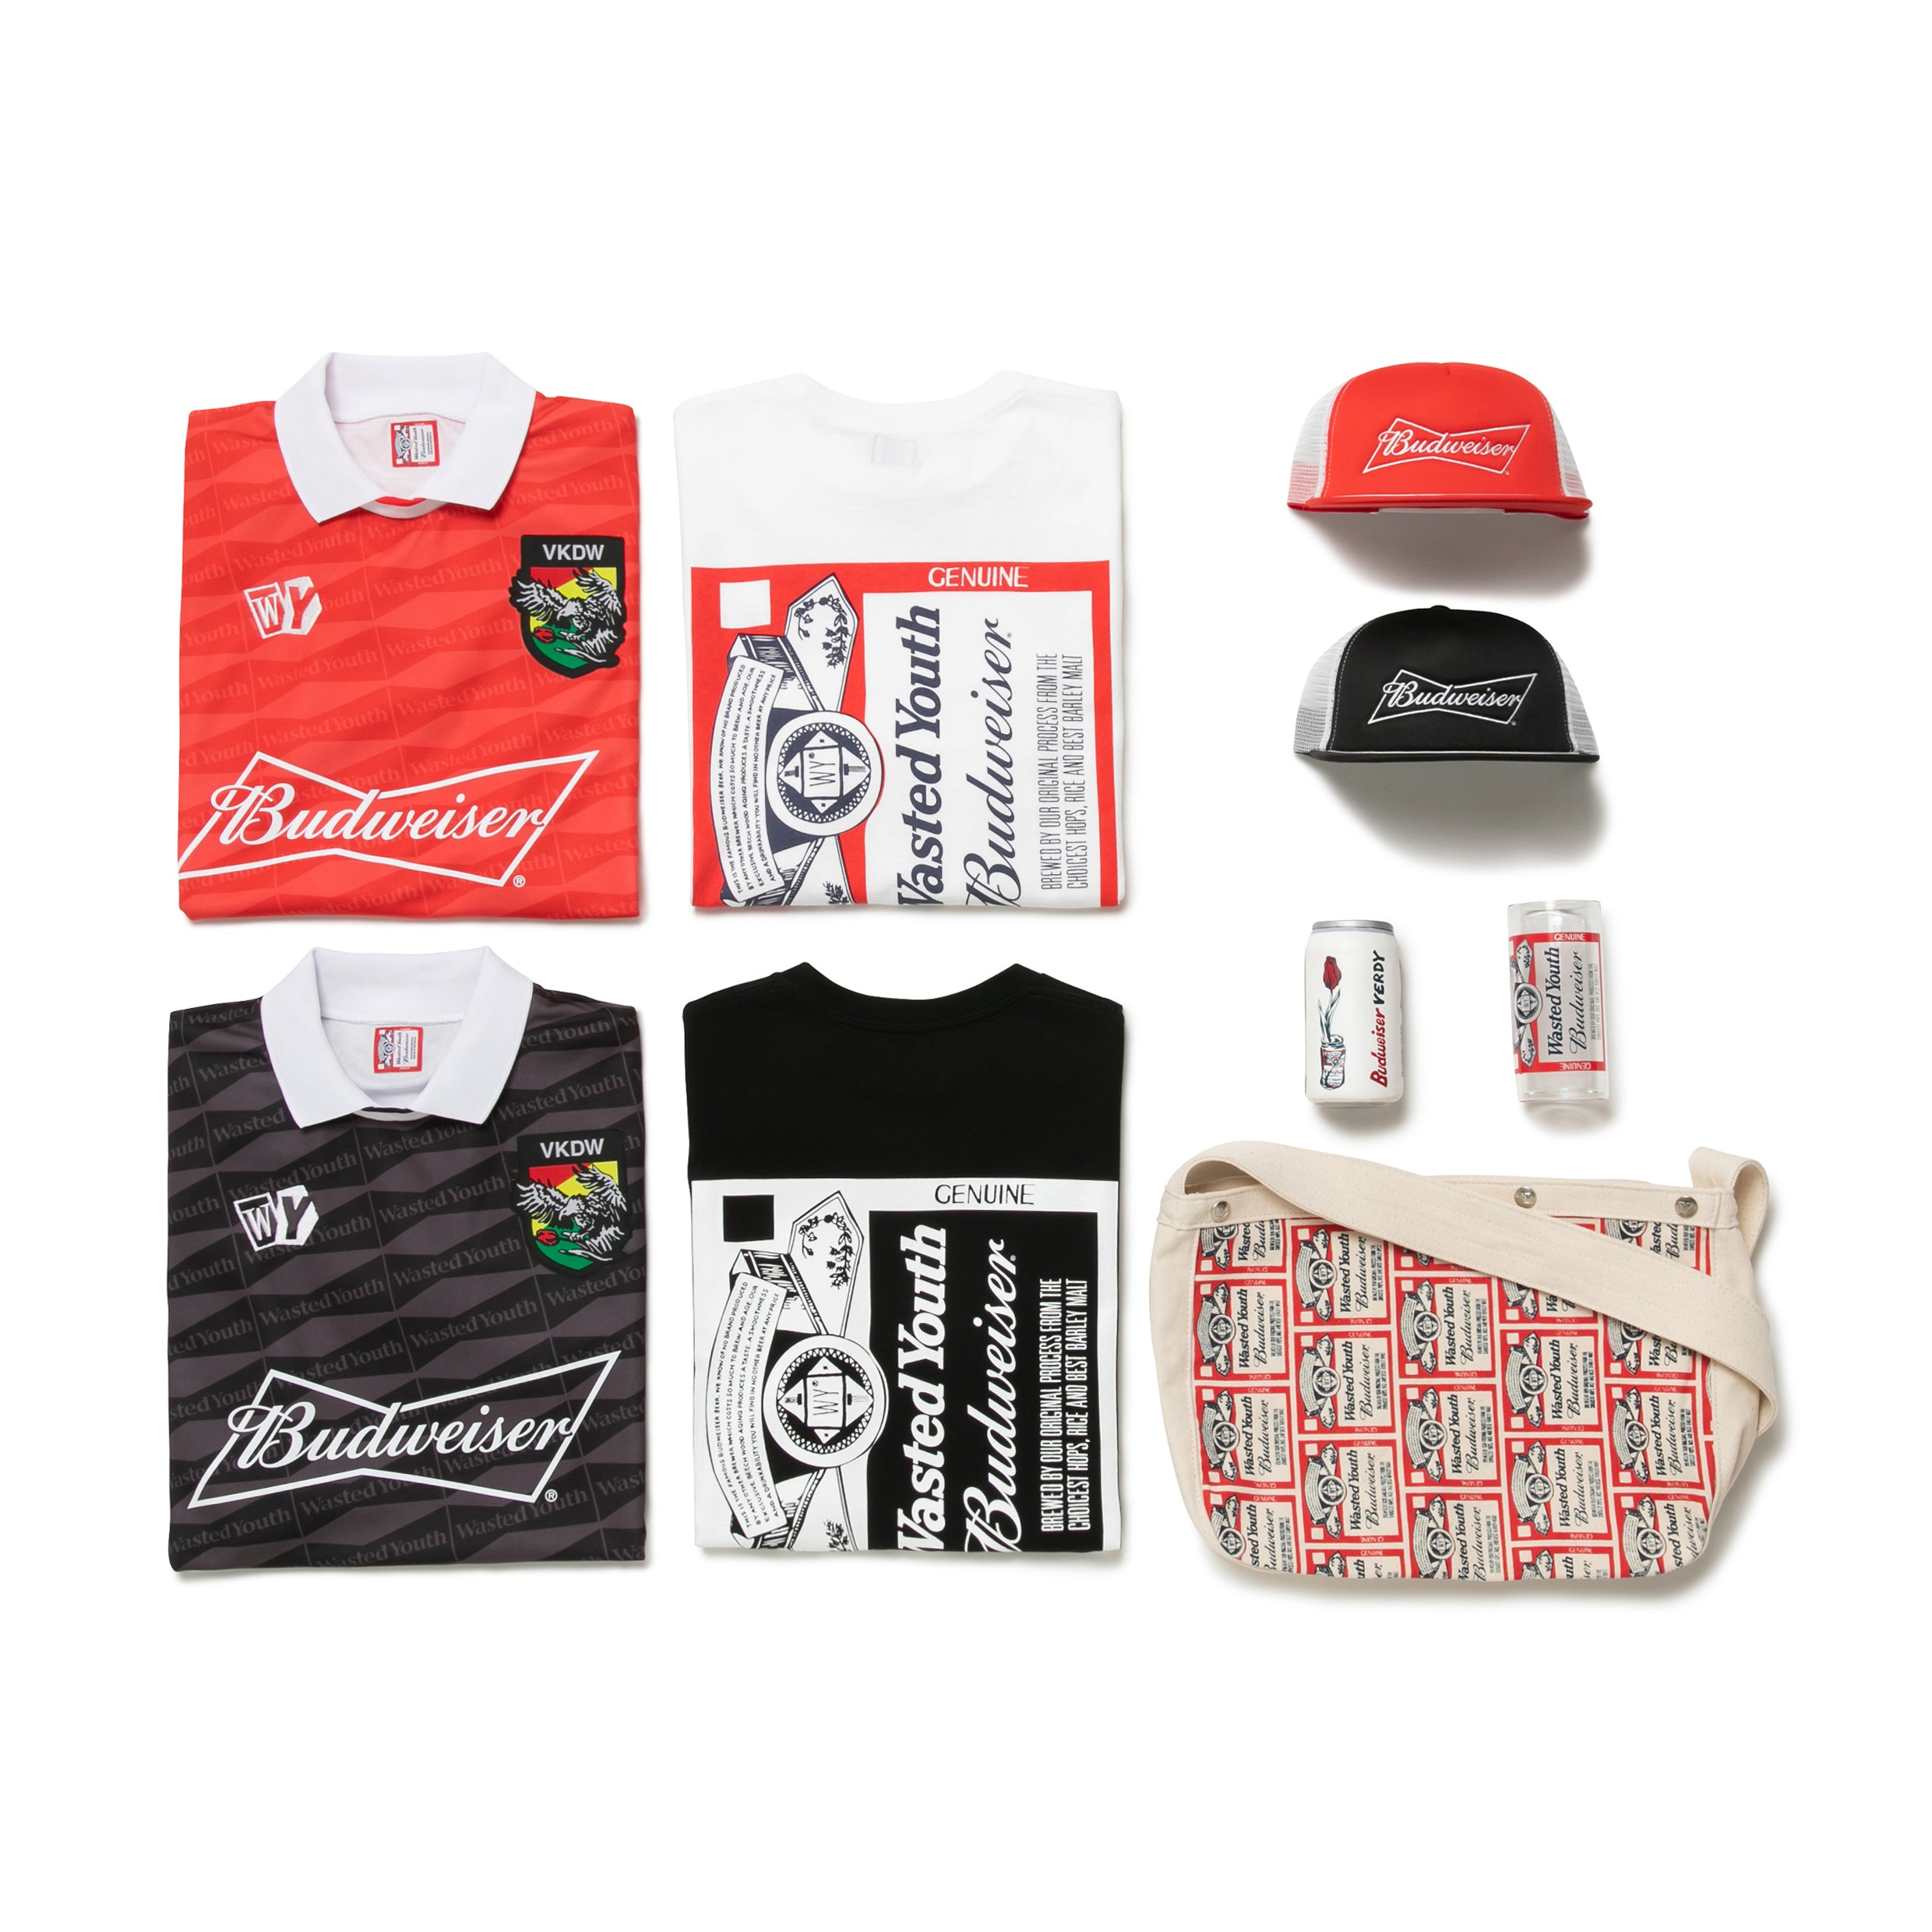 Wasted Youth x Budweiser コラボレーションコレクション発売のお知らせ – HUMAN MADE ONLINE STORE